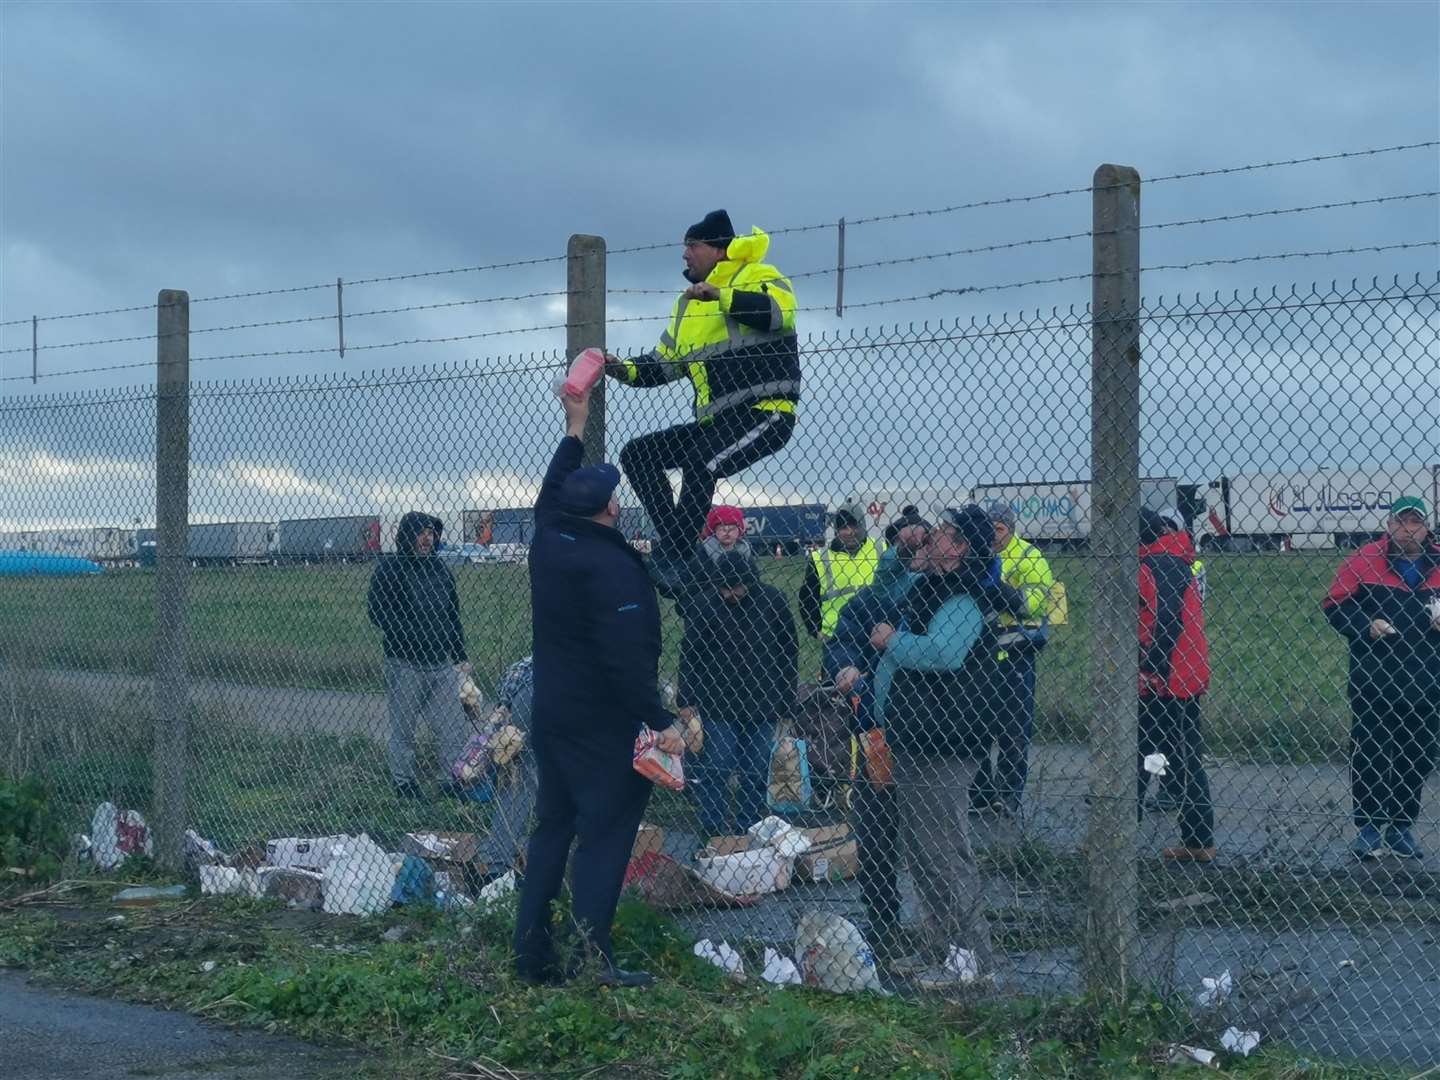 Lorry drivers receive food which is passed over the fence at Manston Airport